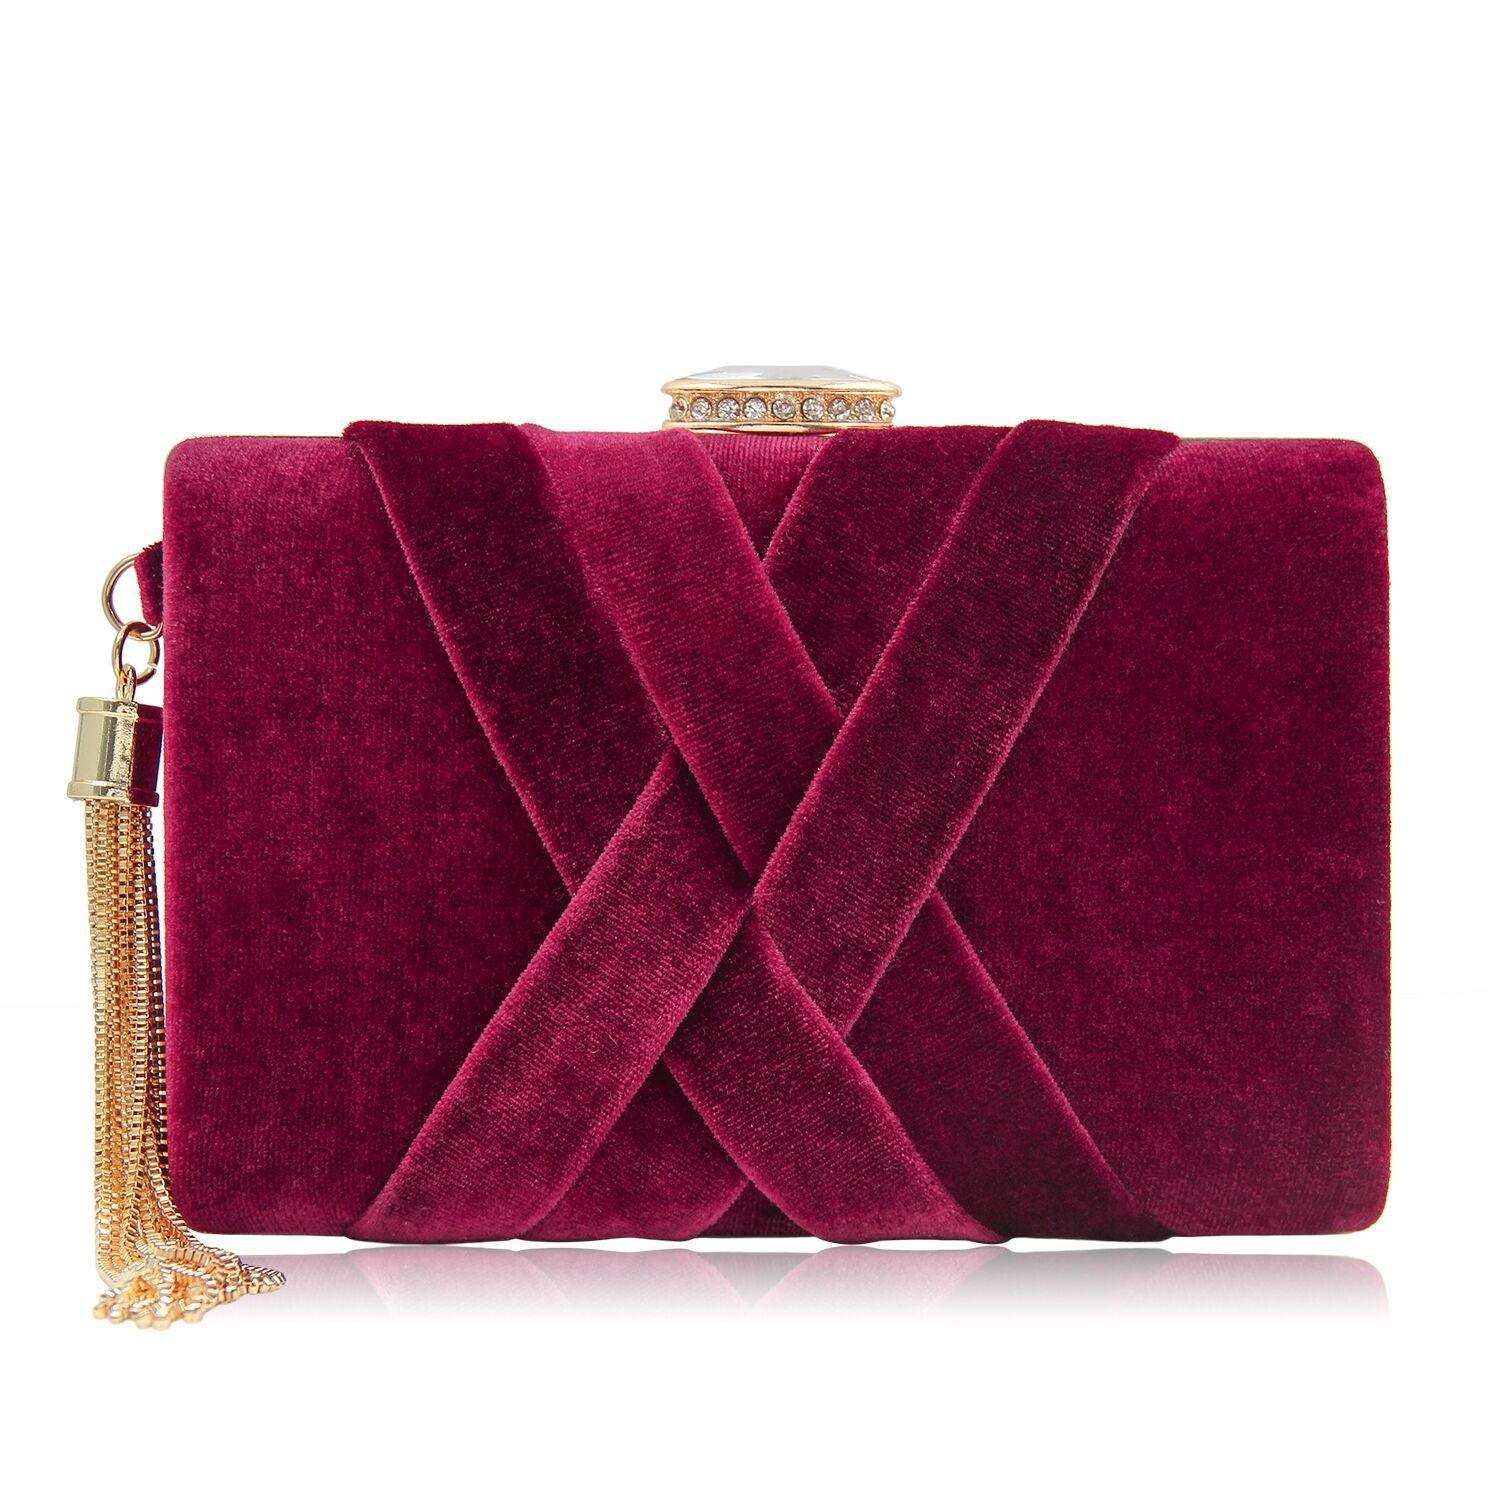 lovevop Milisente  New Arrival Women Clutch Bags Top Quality Suede Clutches Purses Ladies Tassels Evening Bag Wedding Clutches